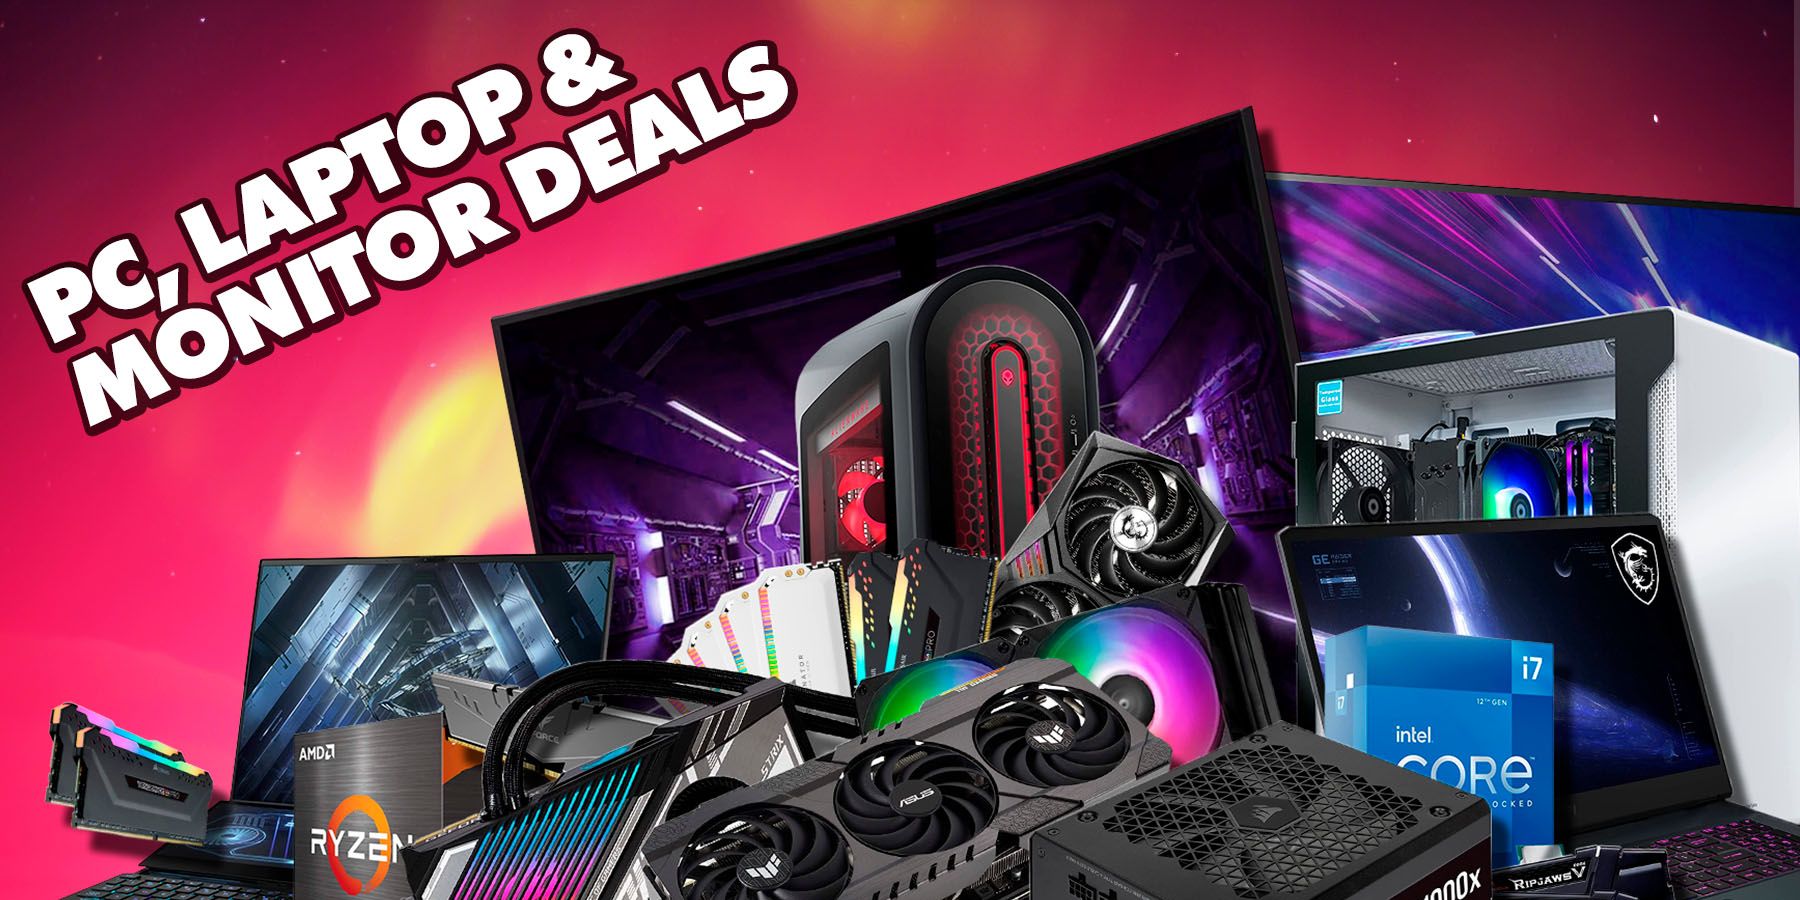 PC Laptop and Monitor Deals - TheGamer.com